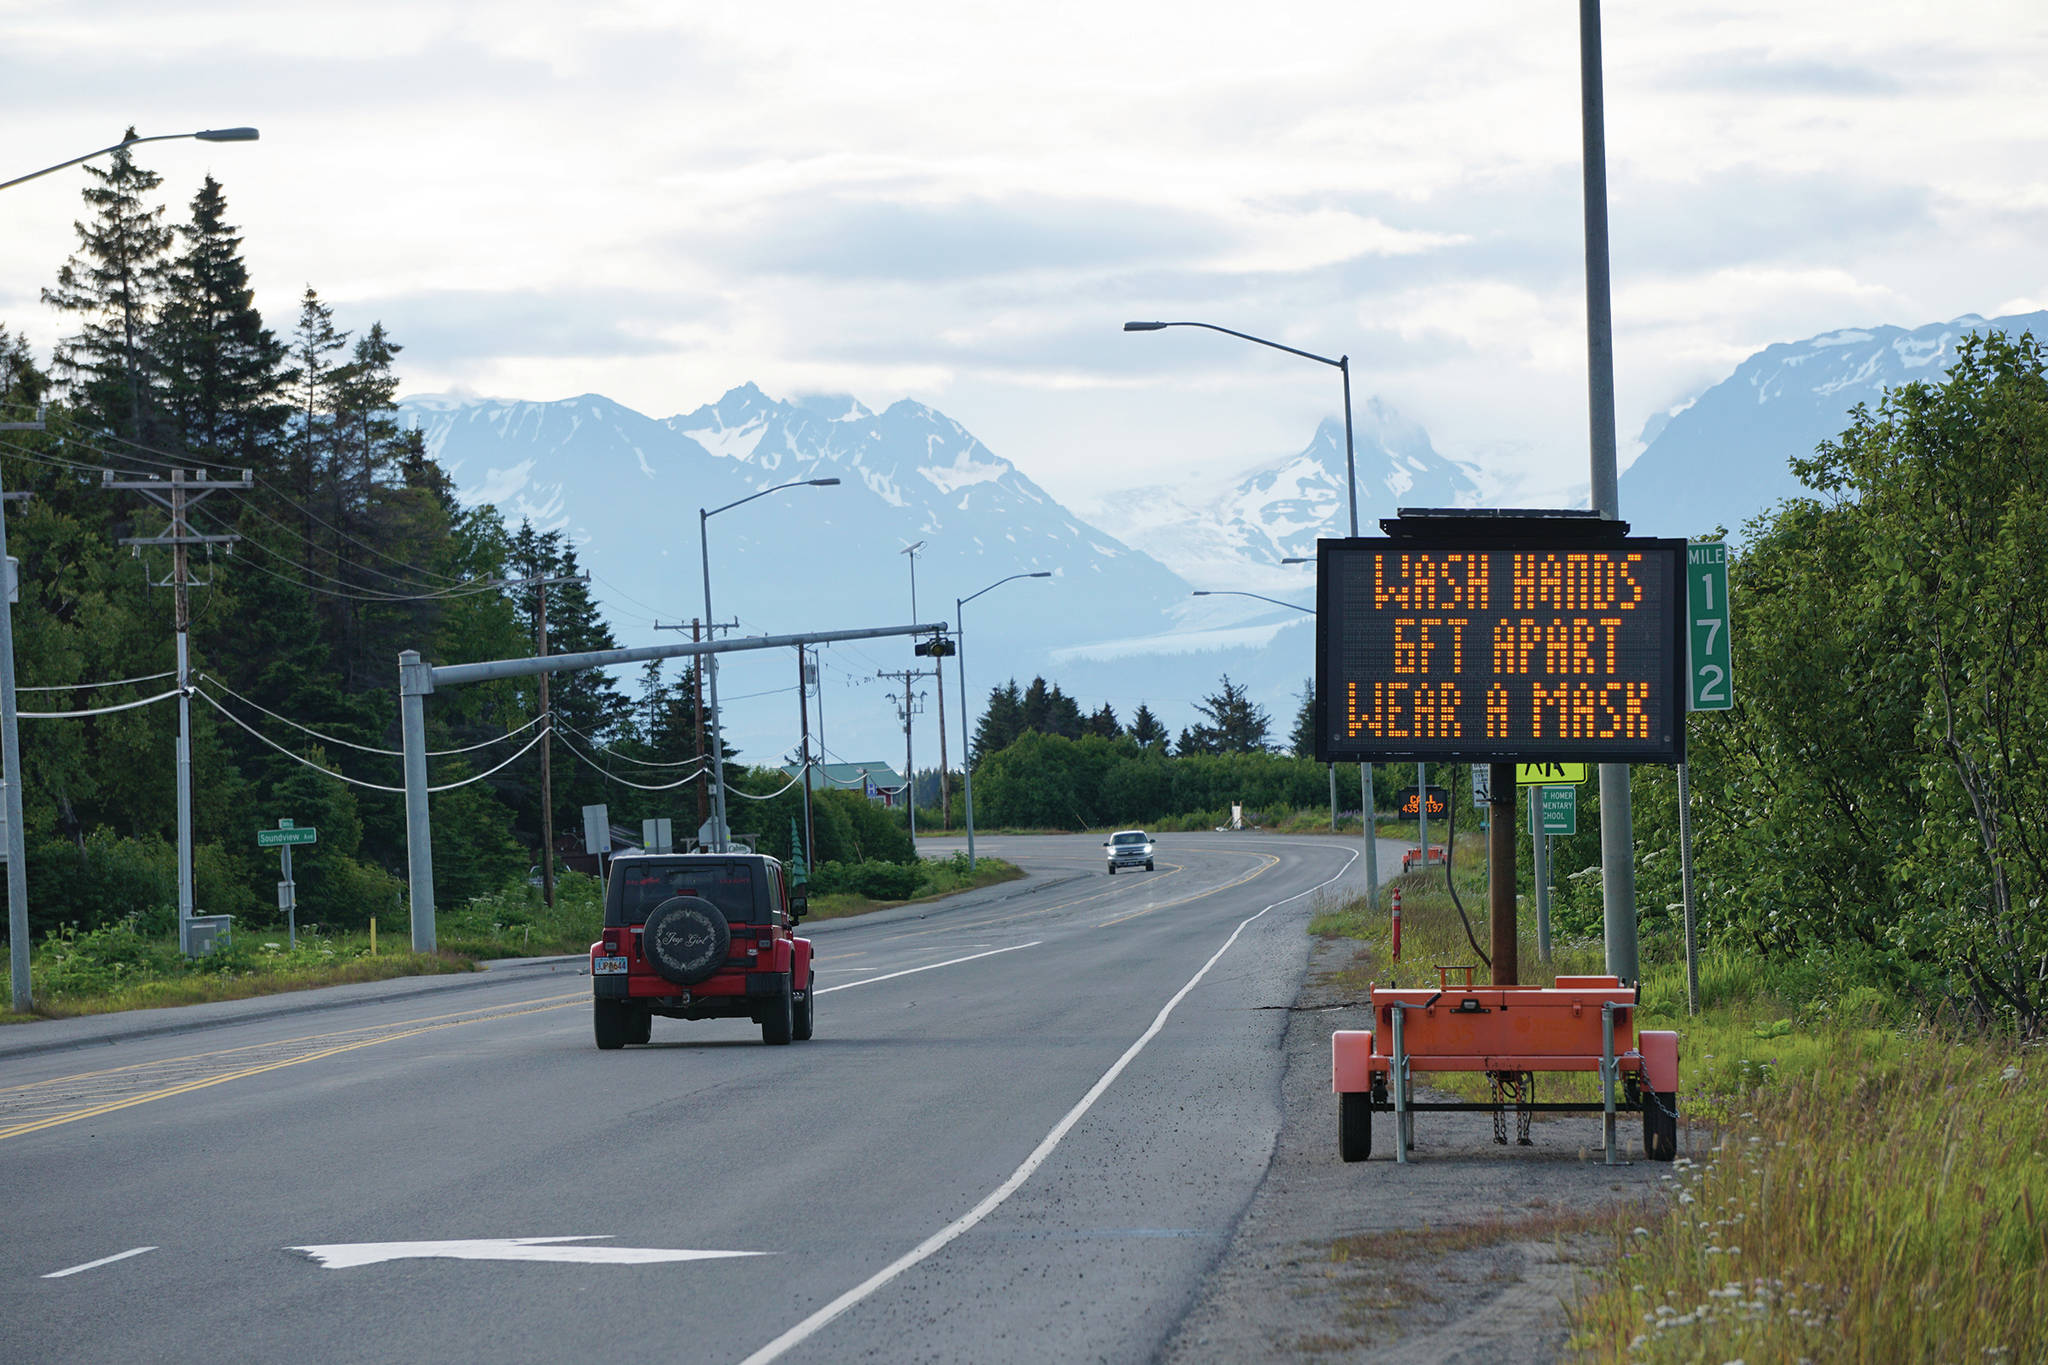 Cars pass the city of Homer advisory signs on Wednesday morning, June 24, 2020, at Mile 172 Sterling Highway near West Hill Road in Homer, Alaska. The sign also reads “Keep COVID-19 out of Homer.” (Photo by Michael Armstrong/Homer News)